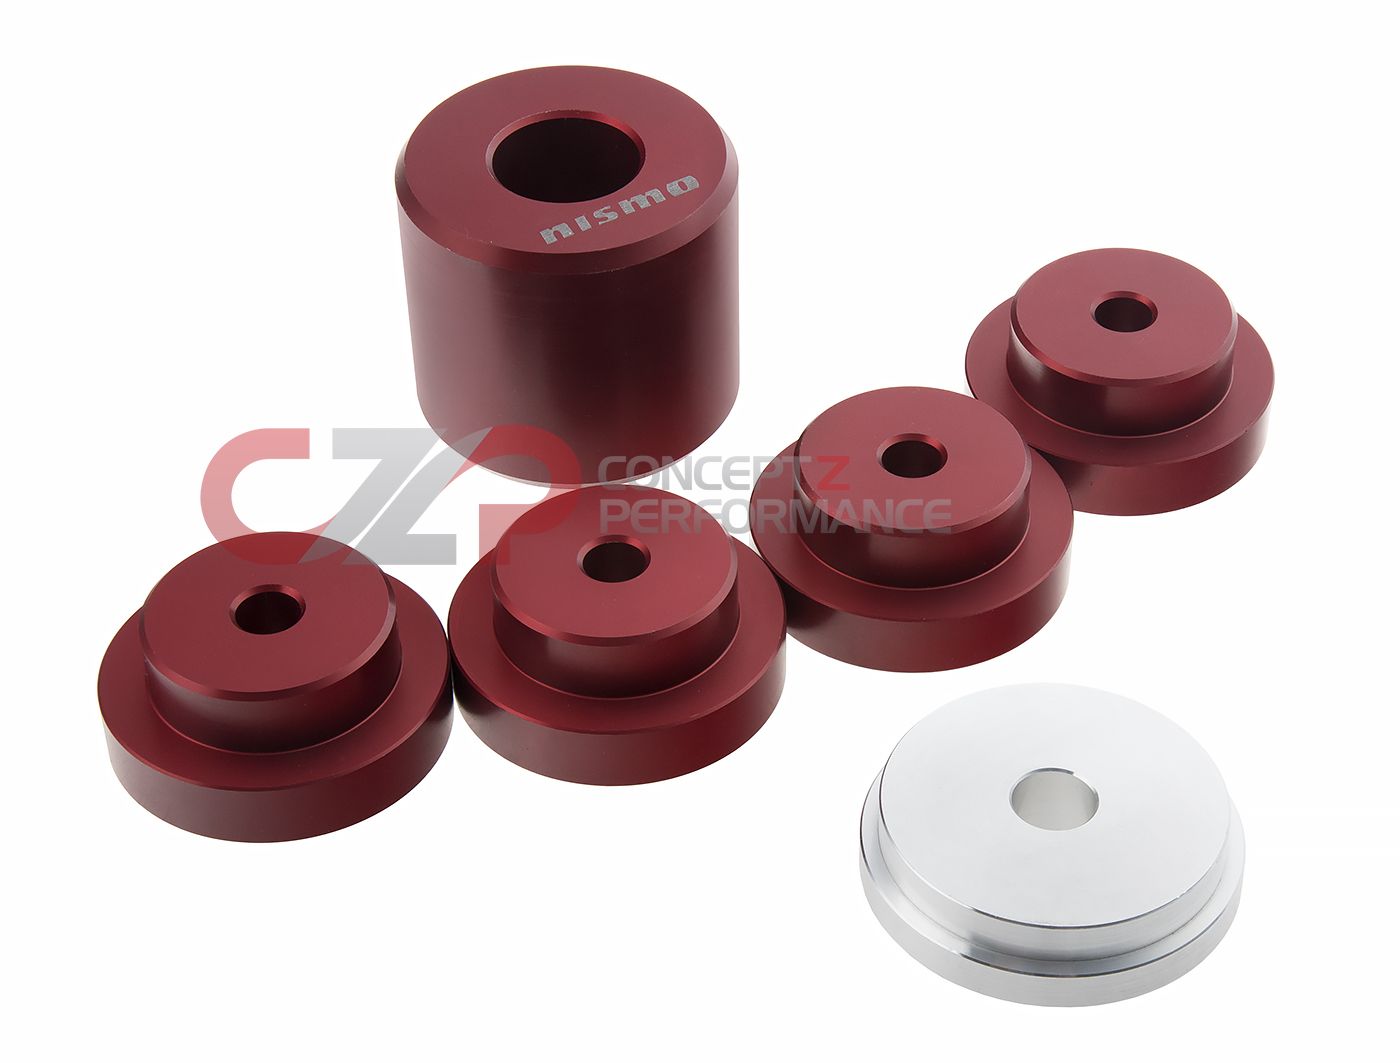 Nismo Solid Differential Bushing Set - Nissan 350Z / Infiniti G35